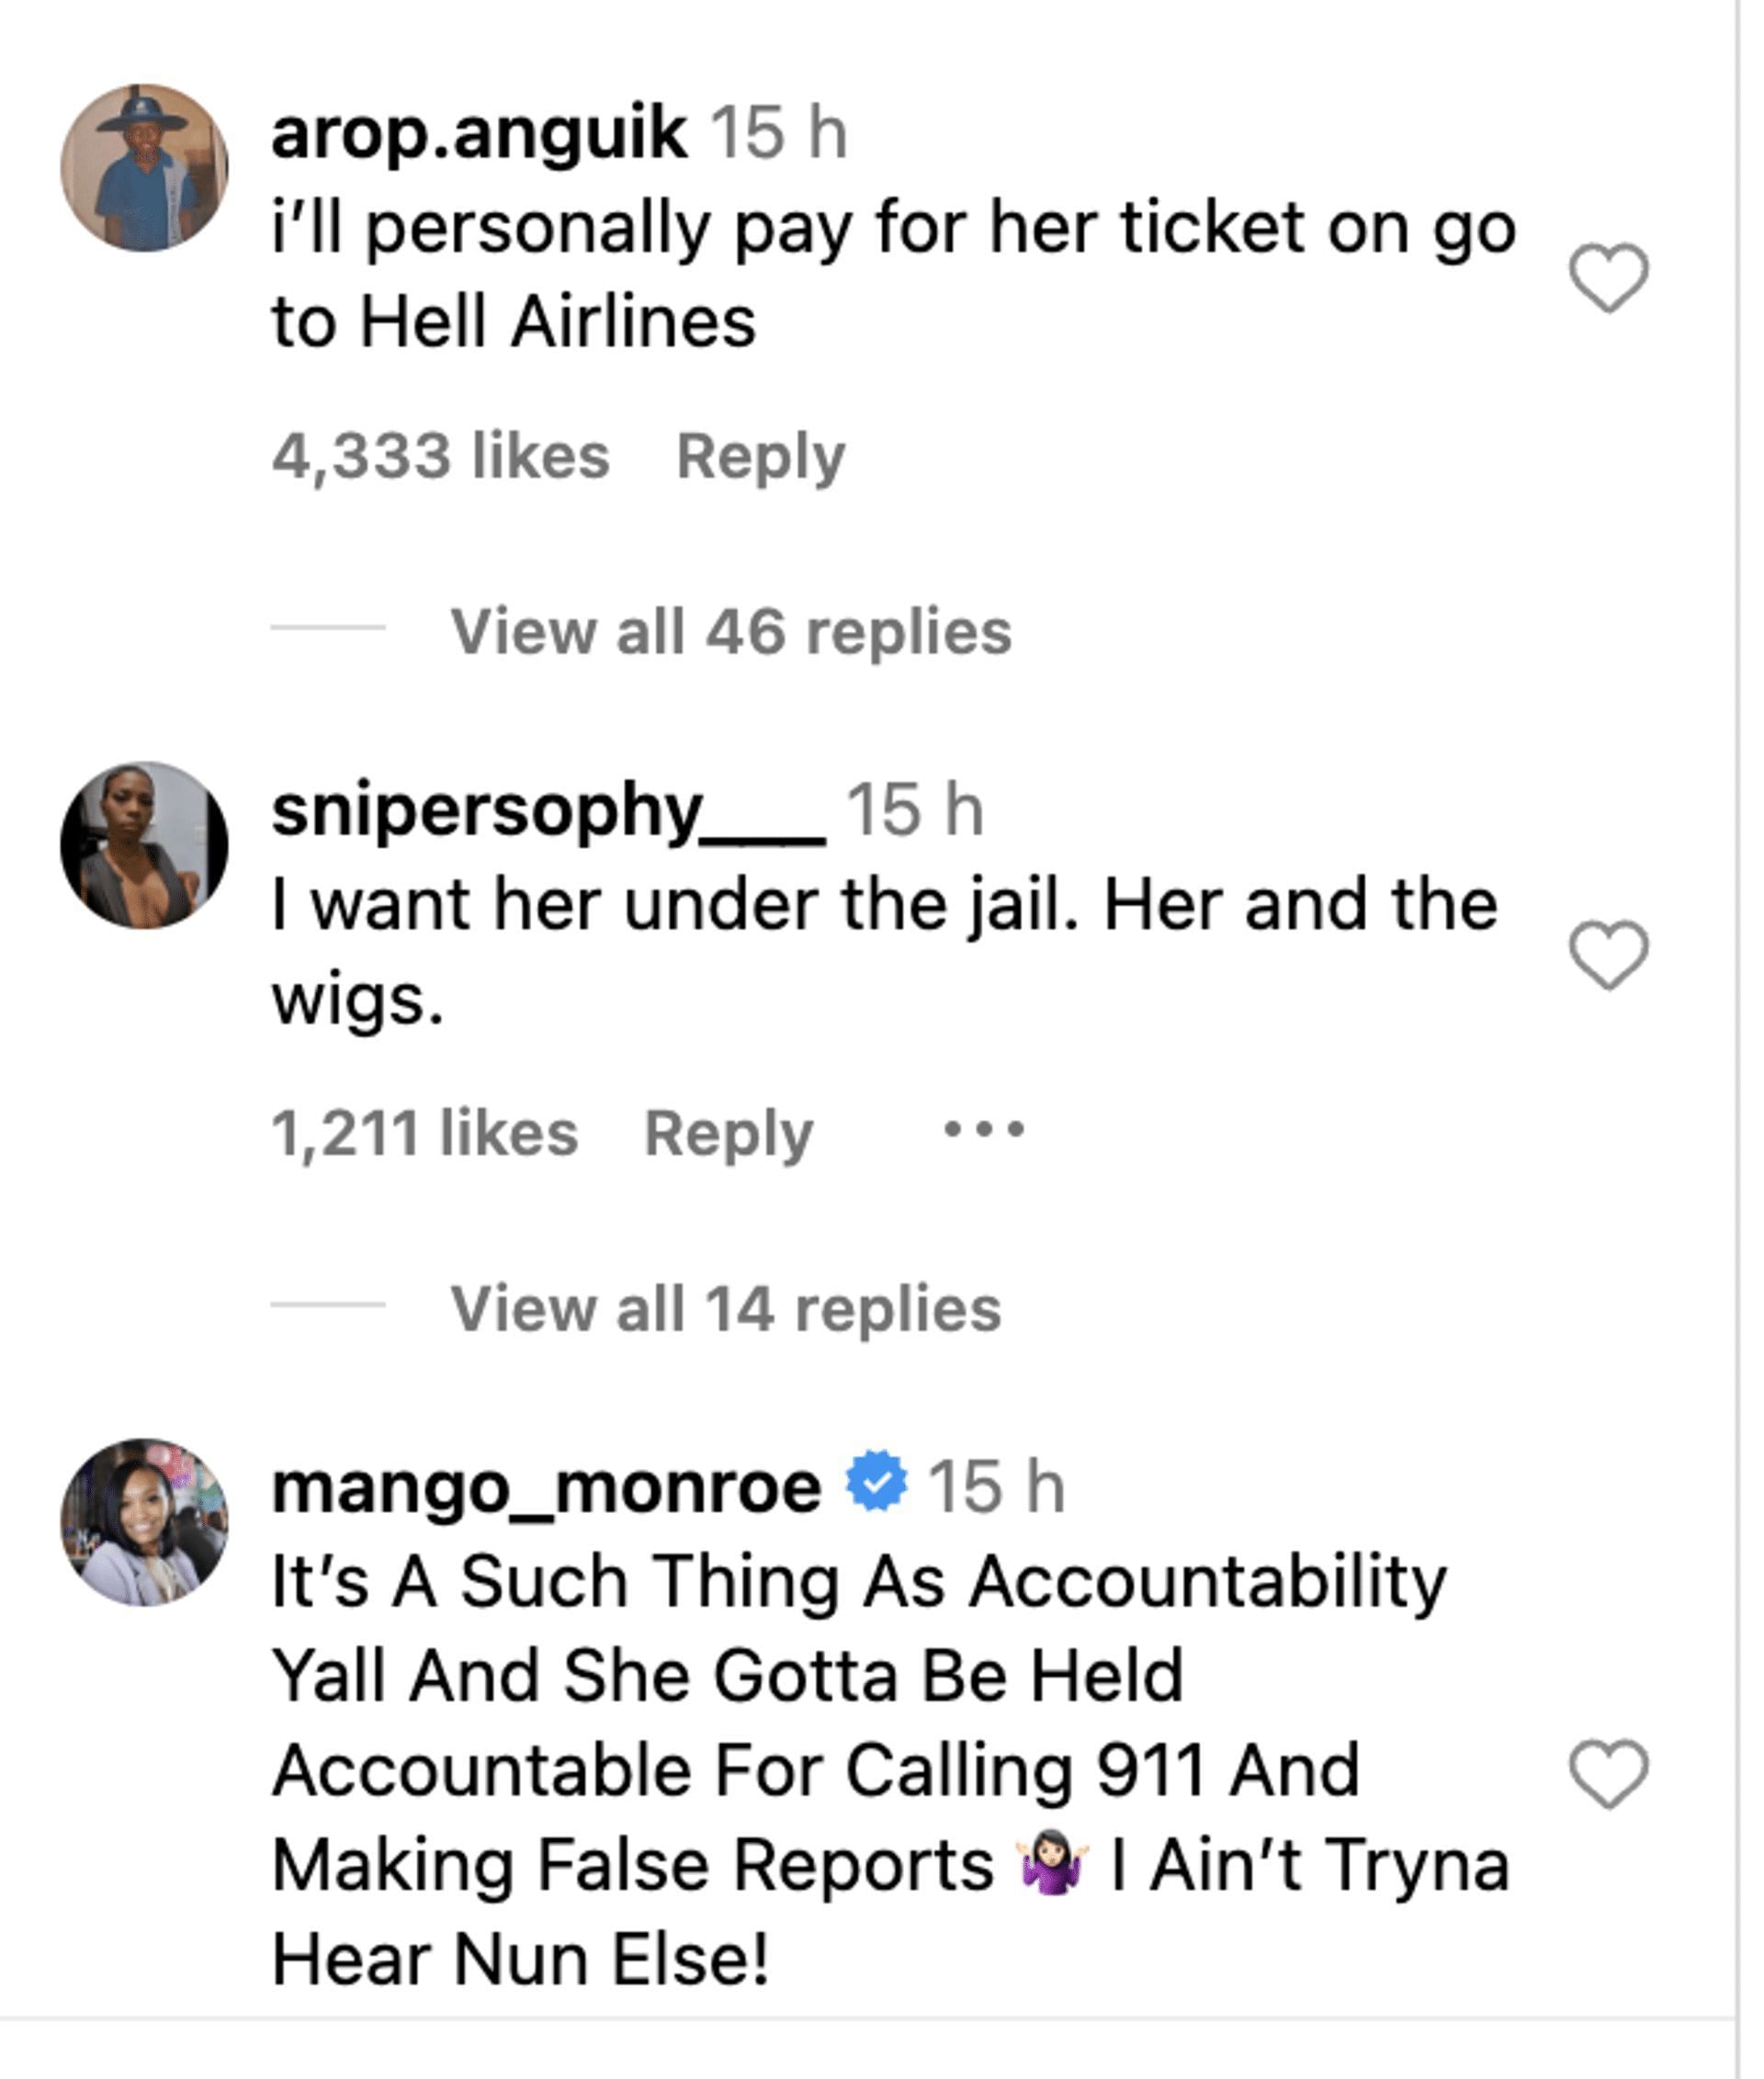 Social media users troll Russell after she makes an alleged comeback to Twitter after reportedly going missing for 49 hours. (Image via Instagram)